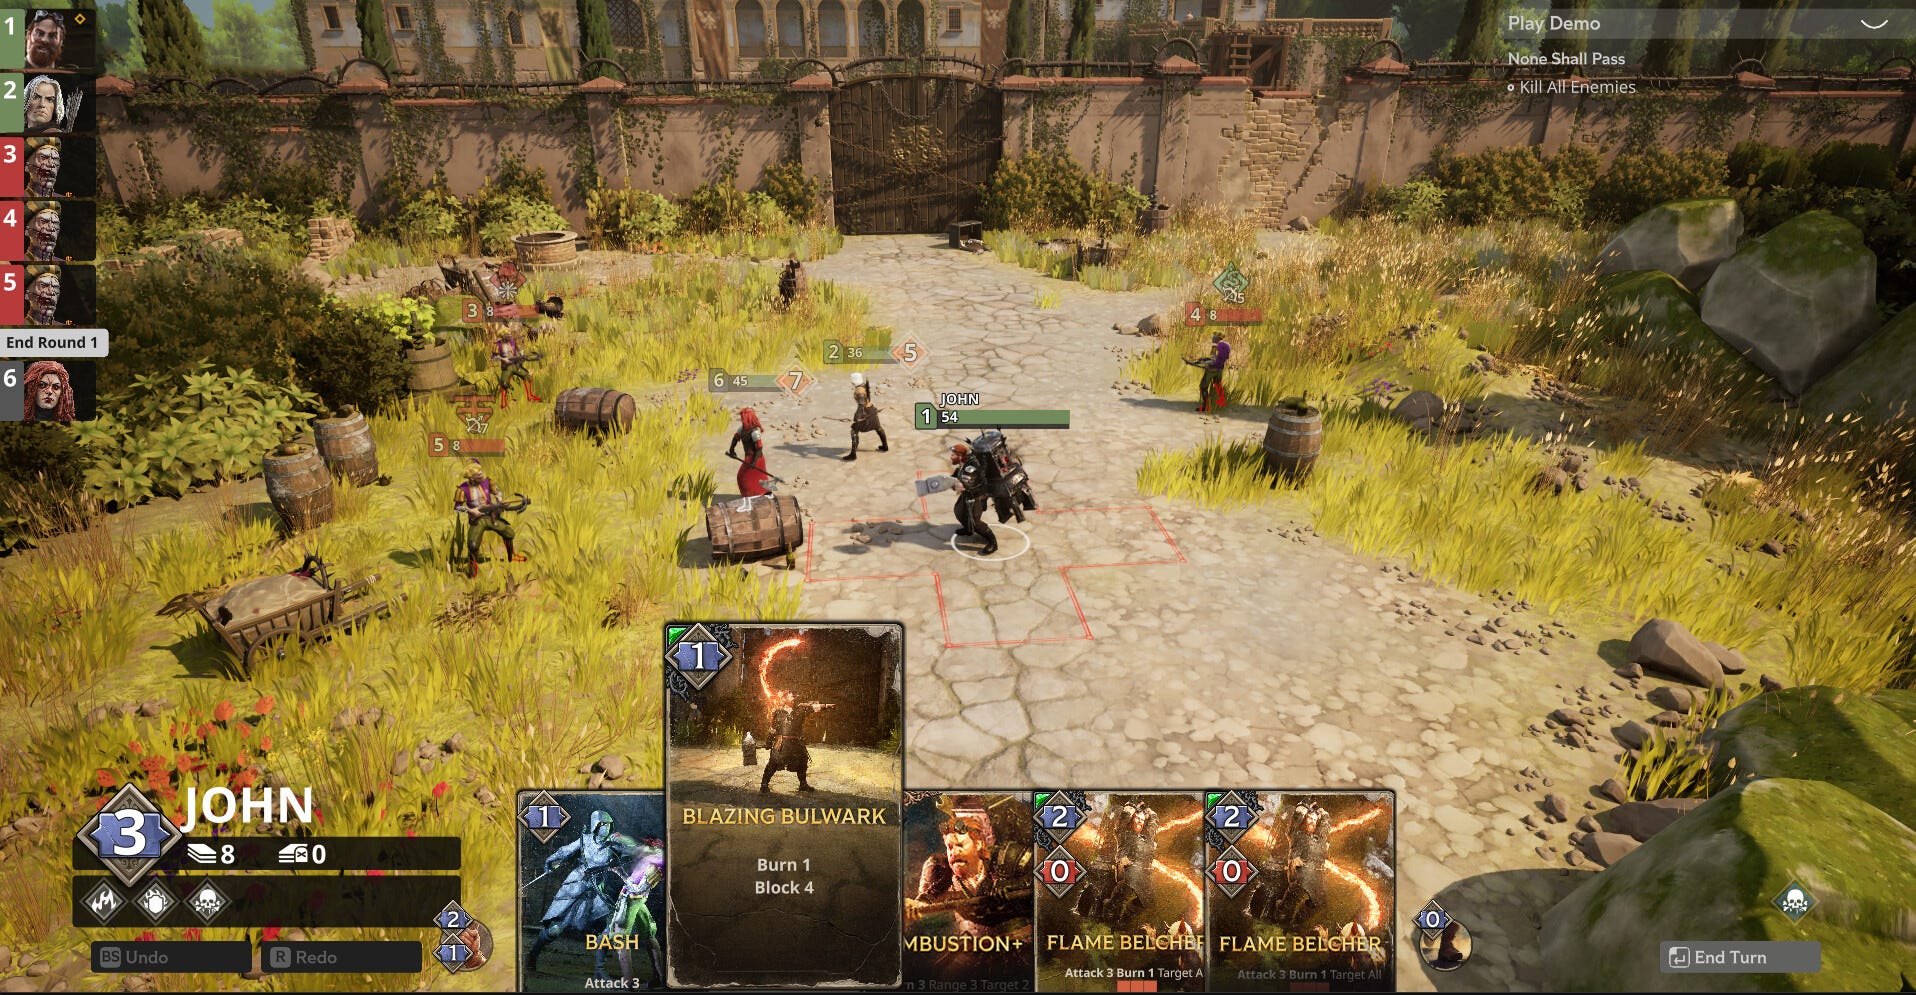 Former Fable devs reveal a new co-op RPG, then announce its development is on hold amid layoffs